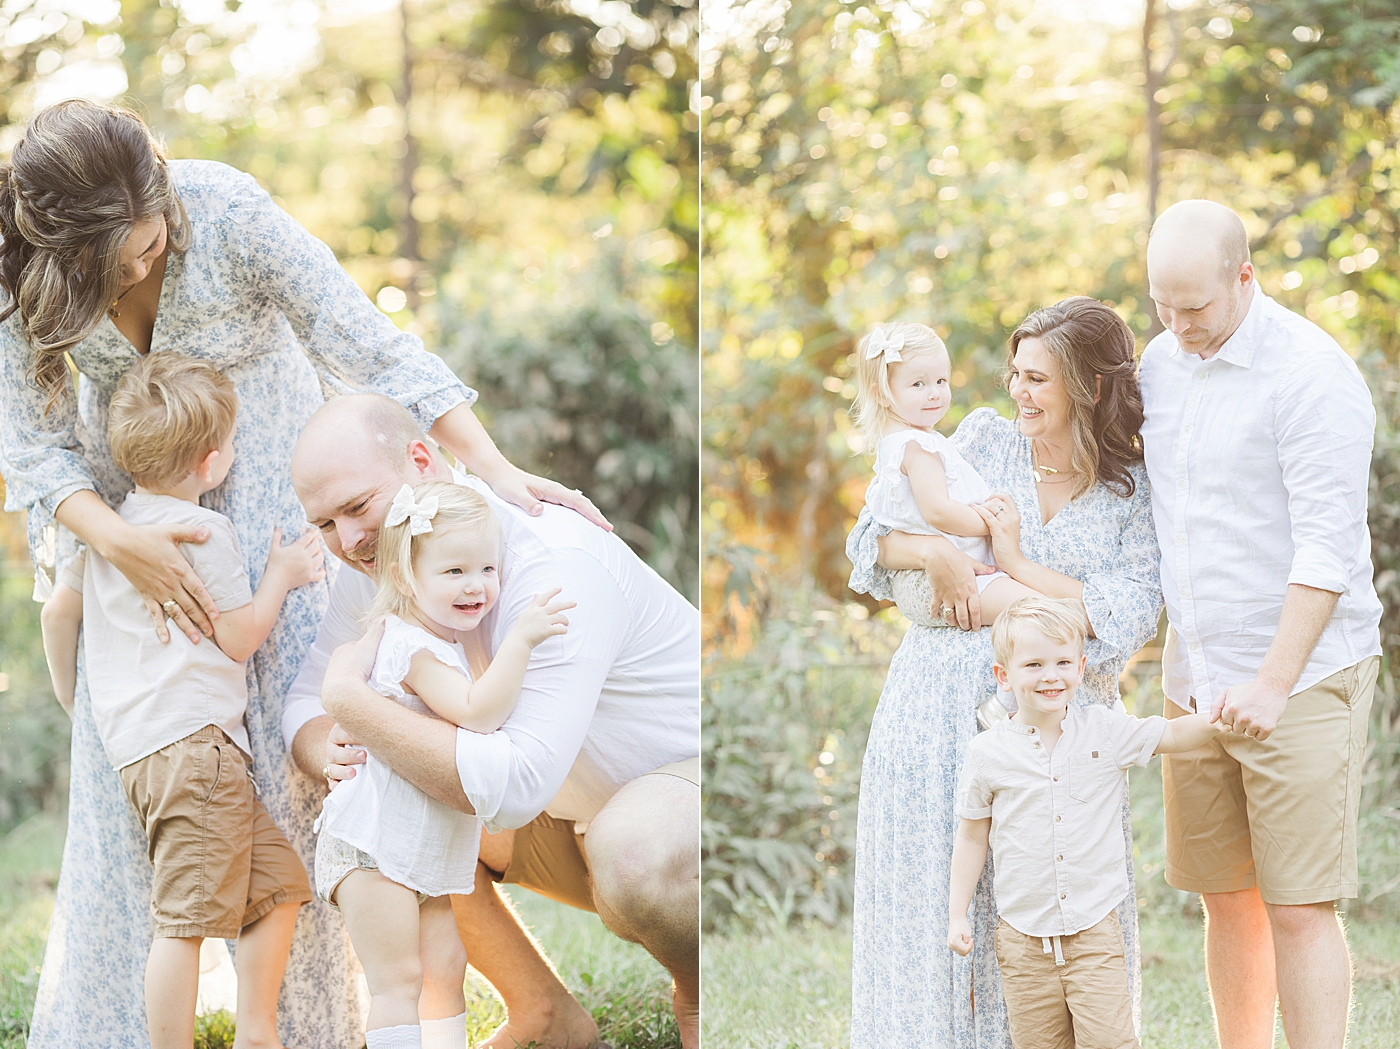 Sunset golden hour photos of family. Photo by Fresh Light Photography.